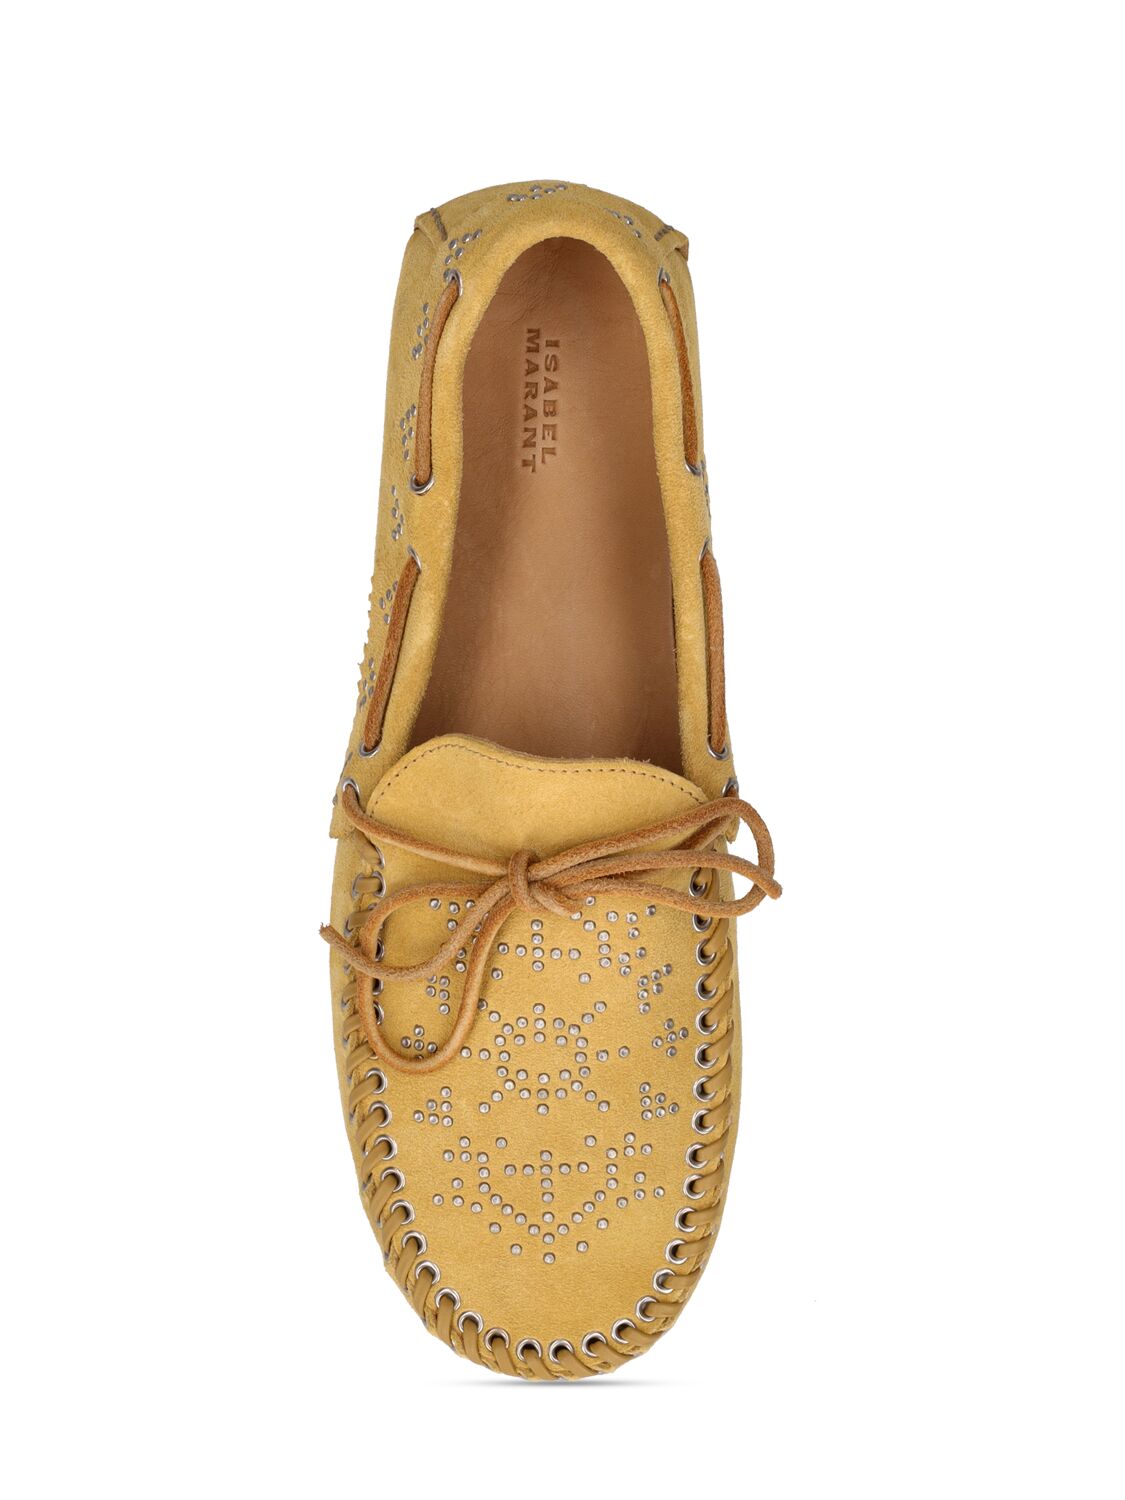 Shop Isabel Marant 10mm Freen Studded Suede Loafers In Light Yellow